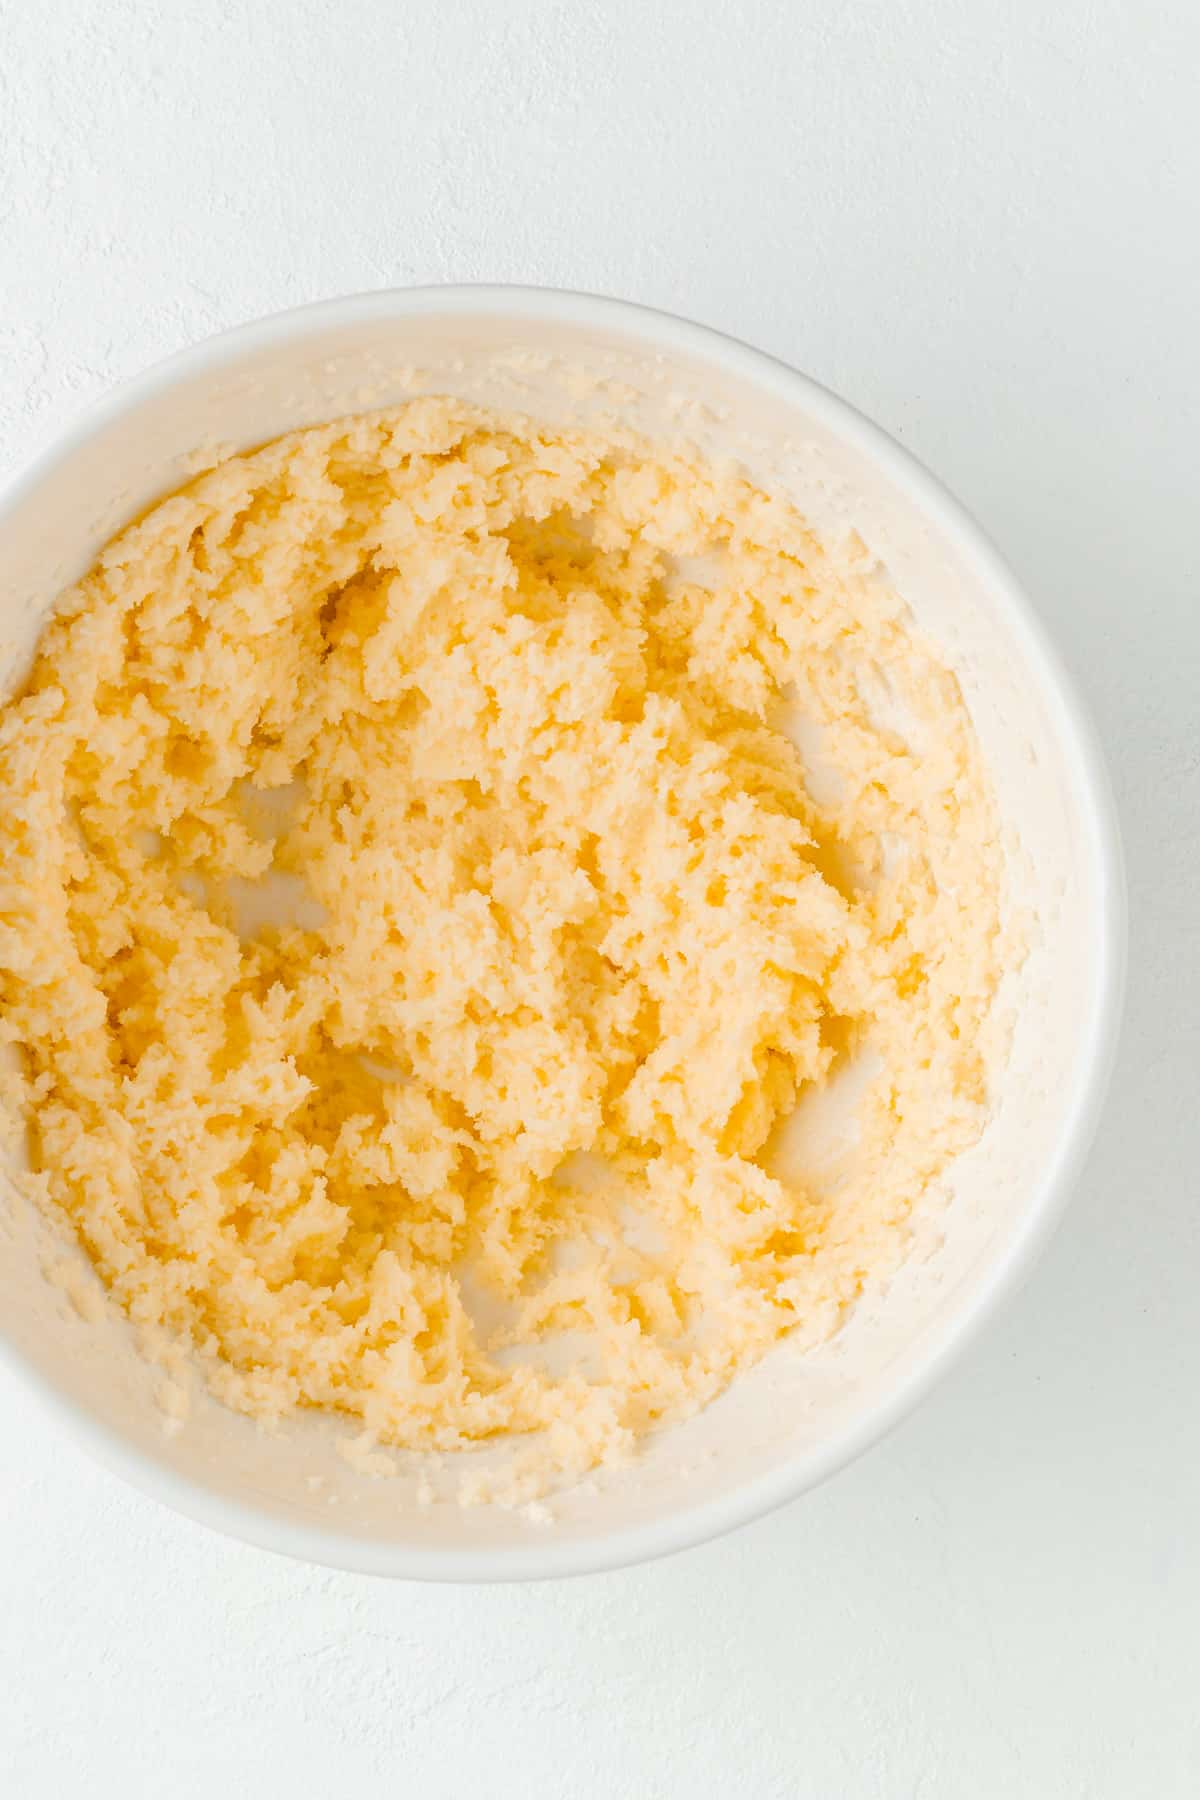 Creamed butter and sugar in white mixing bowl on white background.